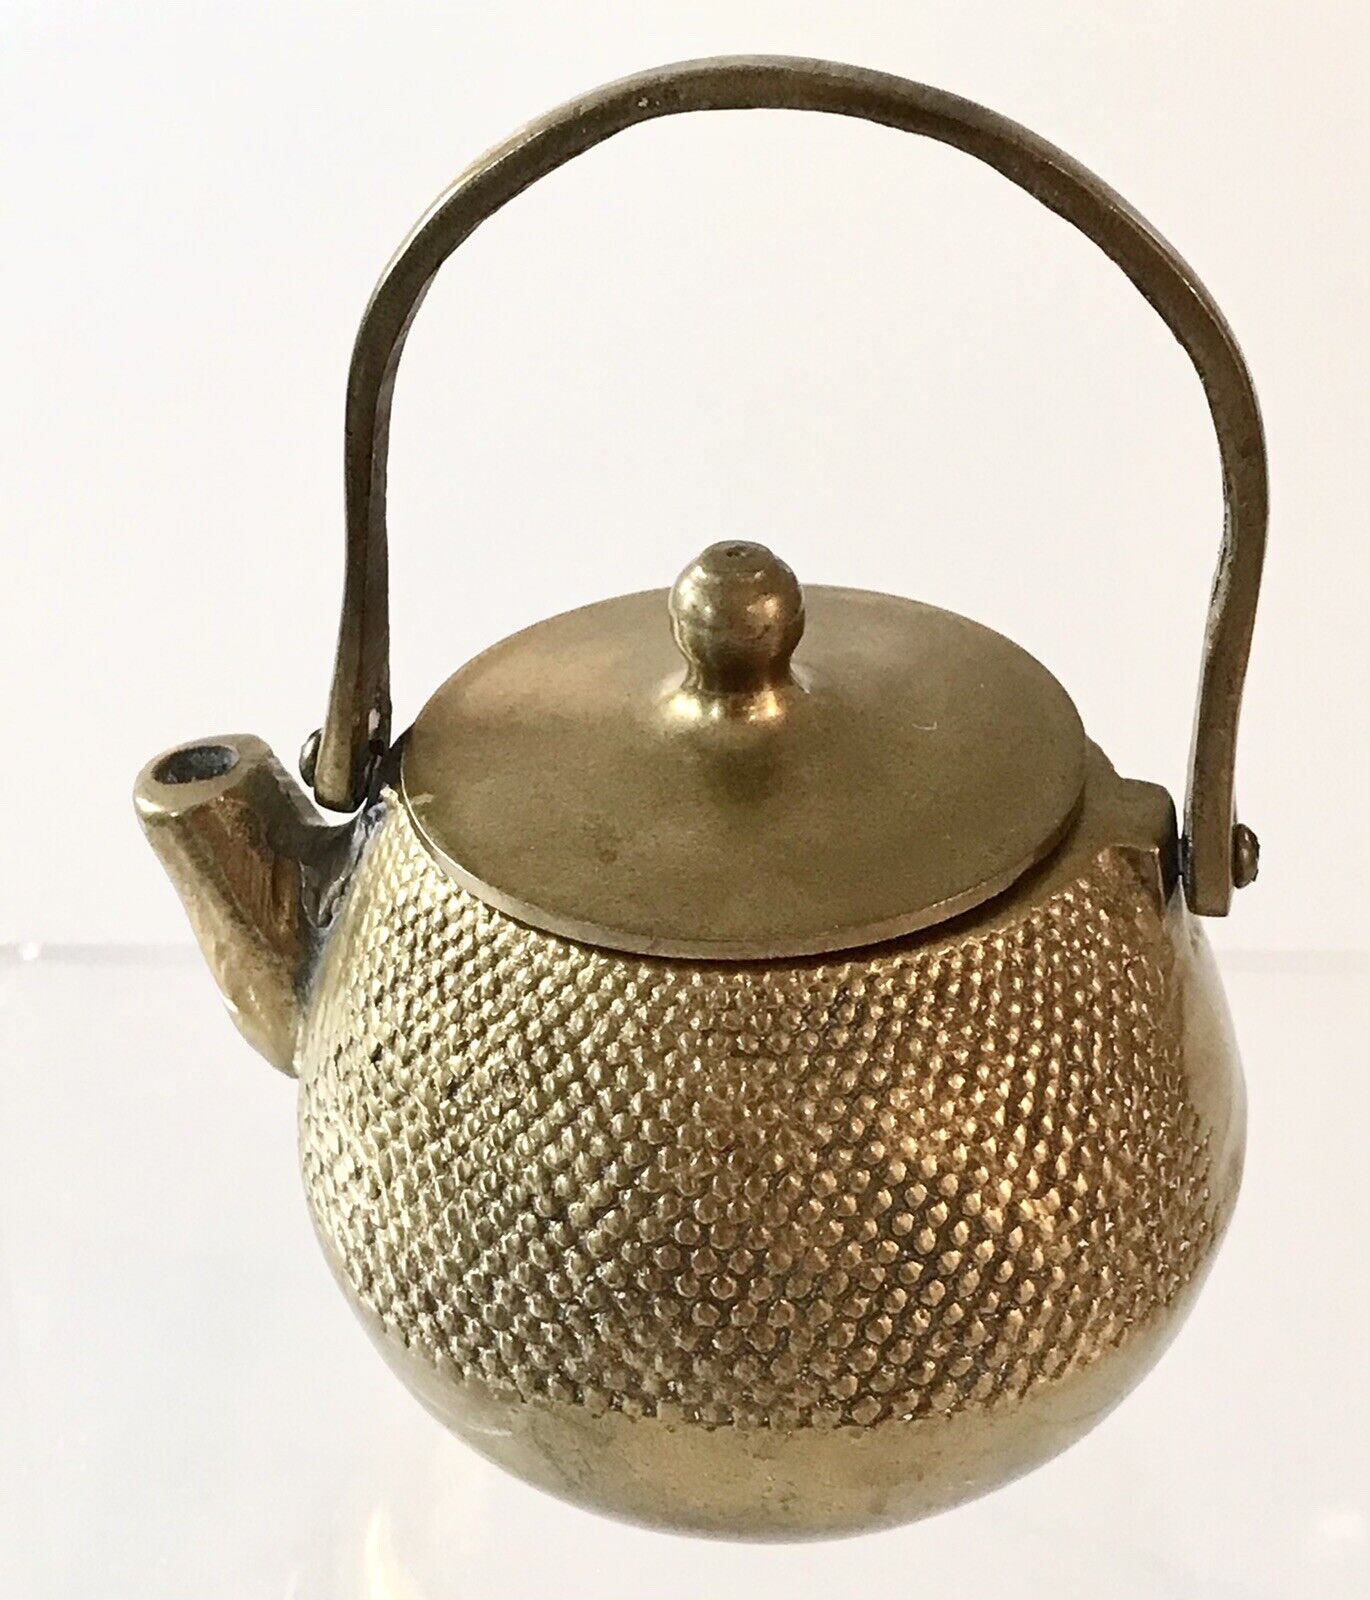 BRASS TEAPOT with Lid Swivel Handle 3 3/4 x 2 1/2 in Decor Vintage Small